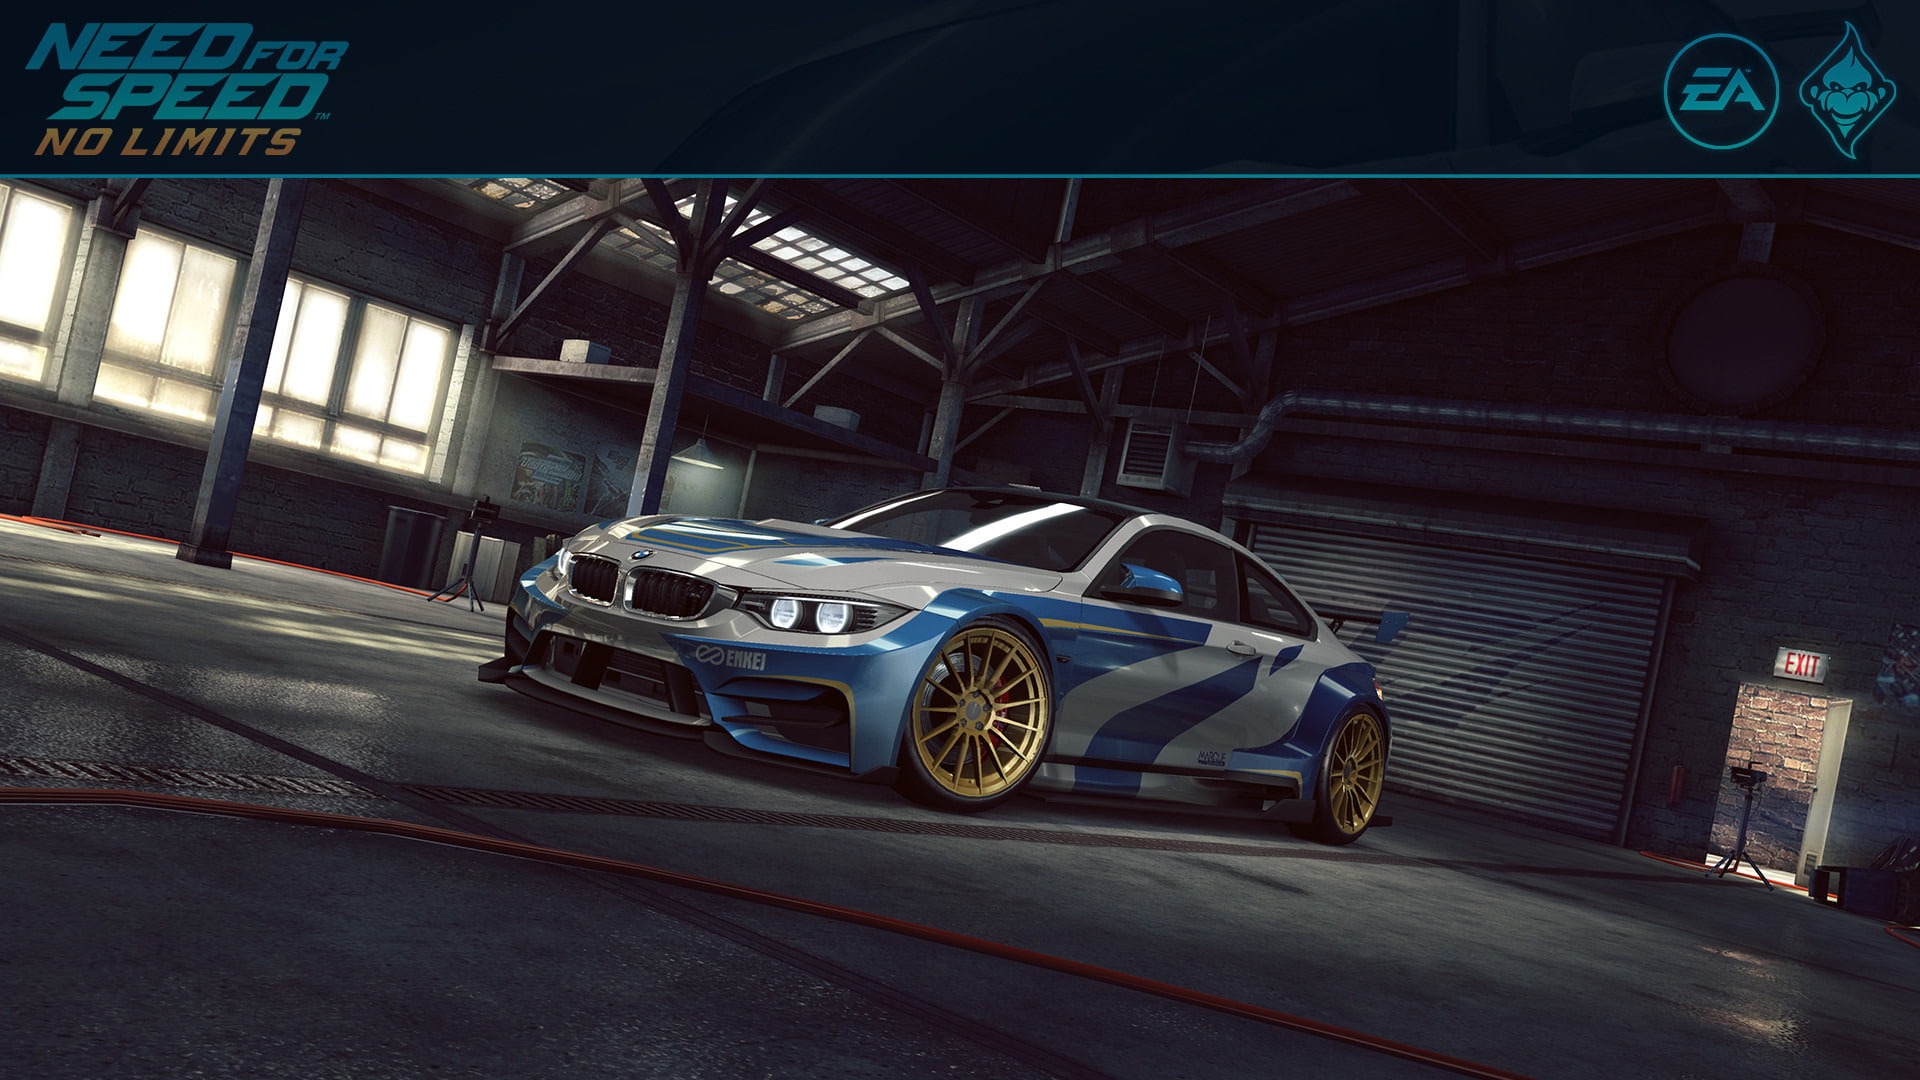 need for speed no limits video games car vehicle garages bmw m4 tuning need for speed